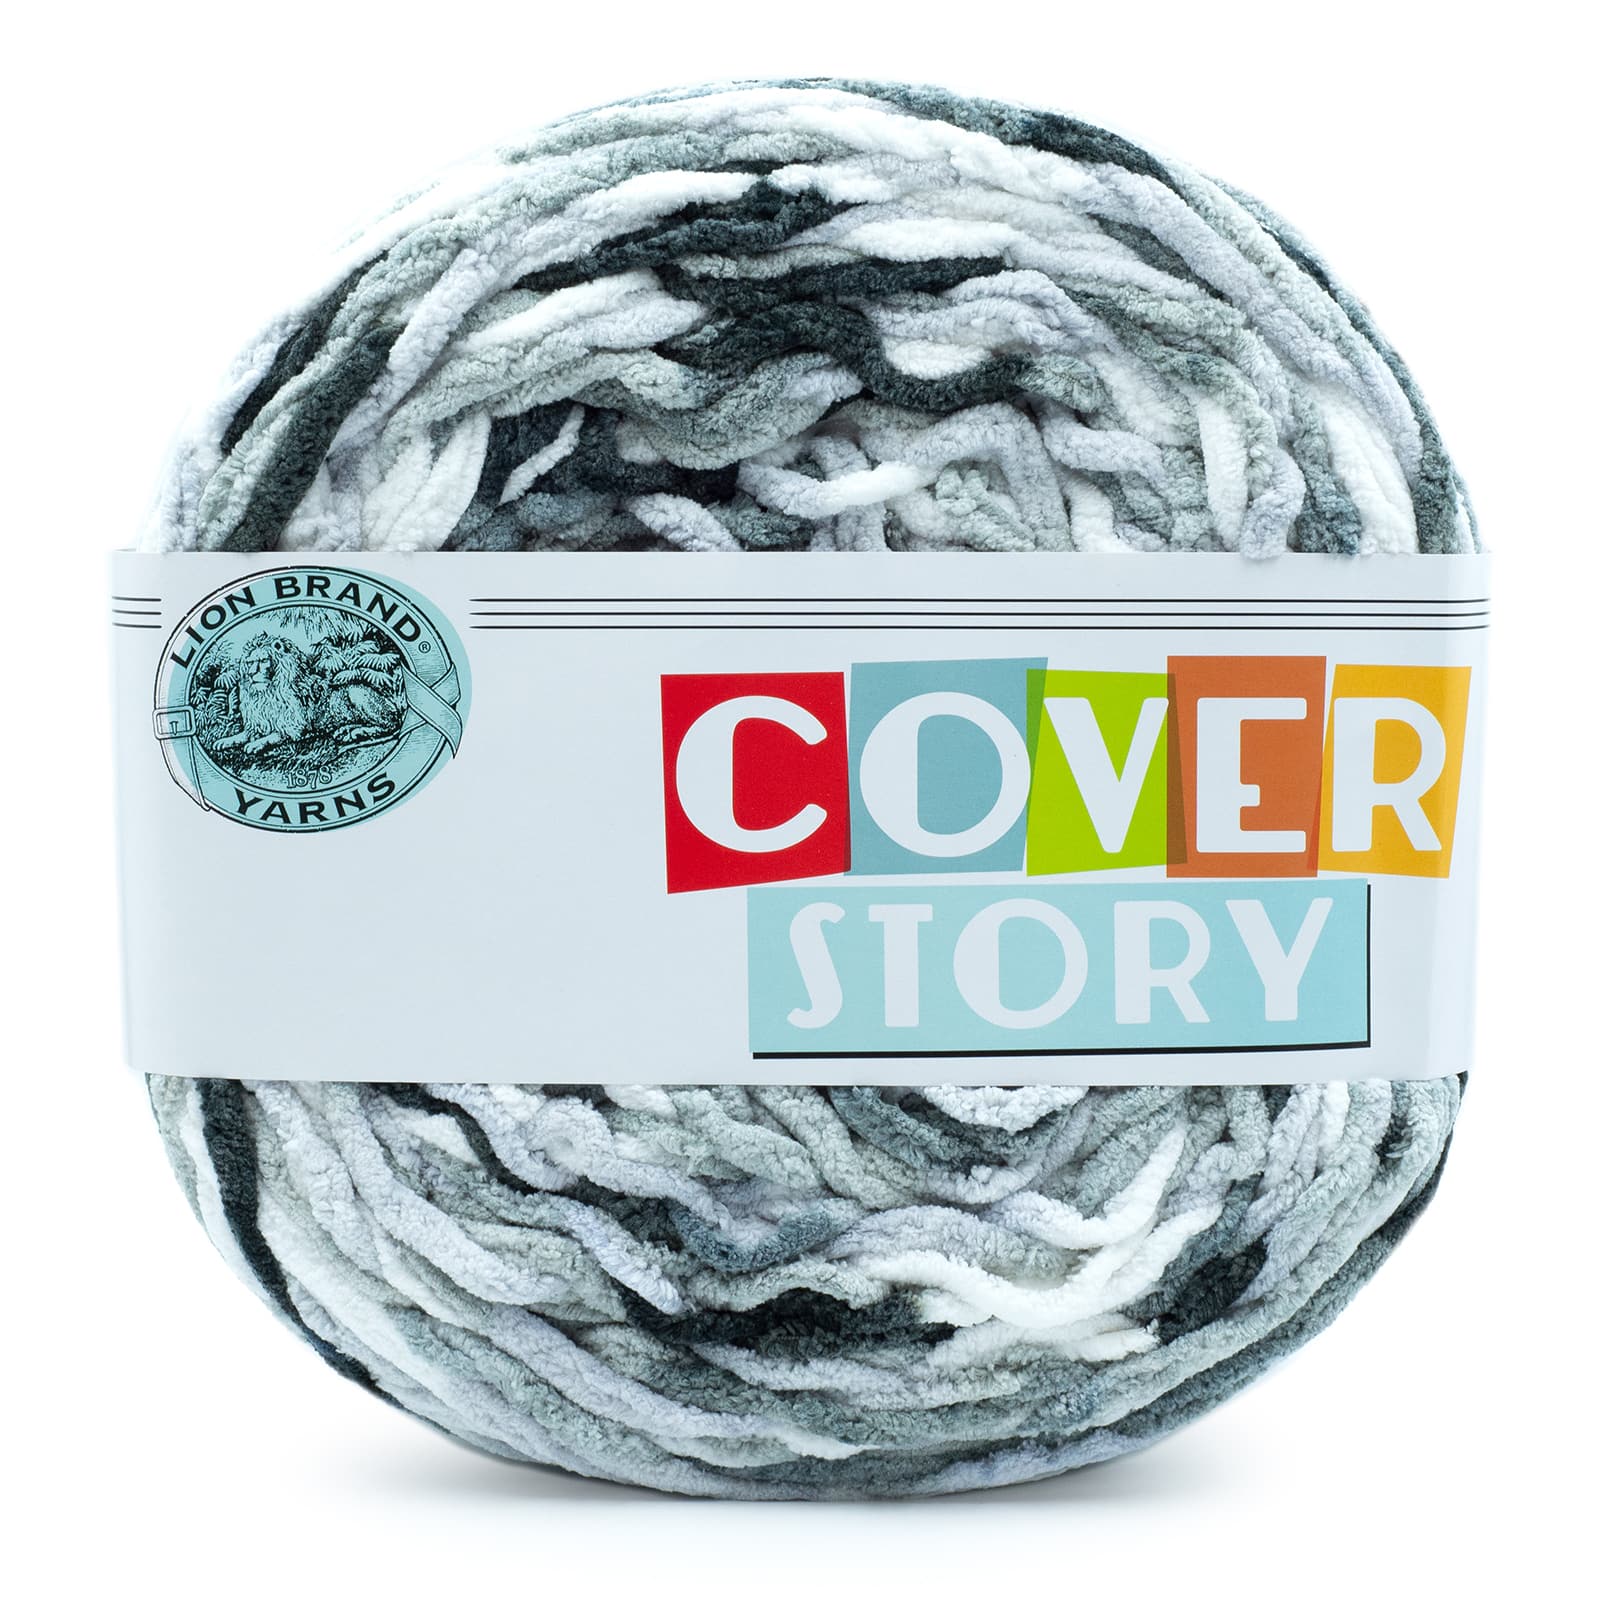 Lion Brand Cover Story Yarn- Clearance